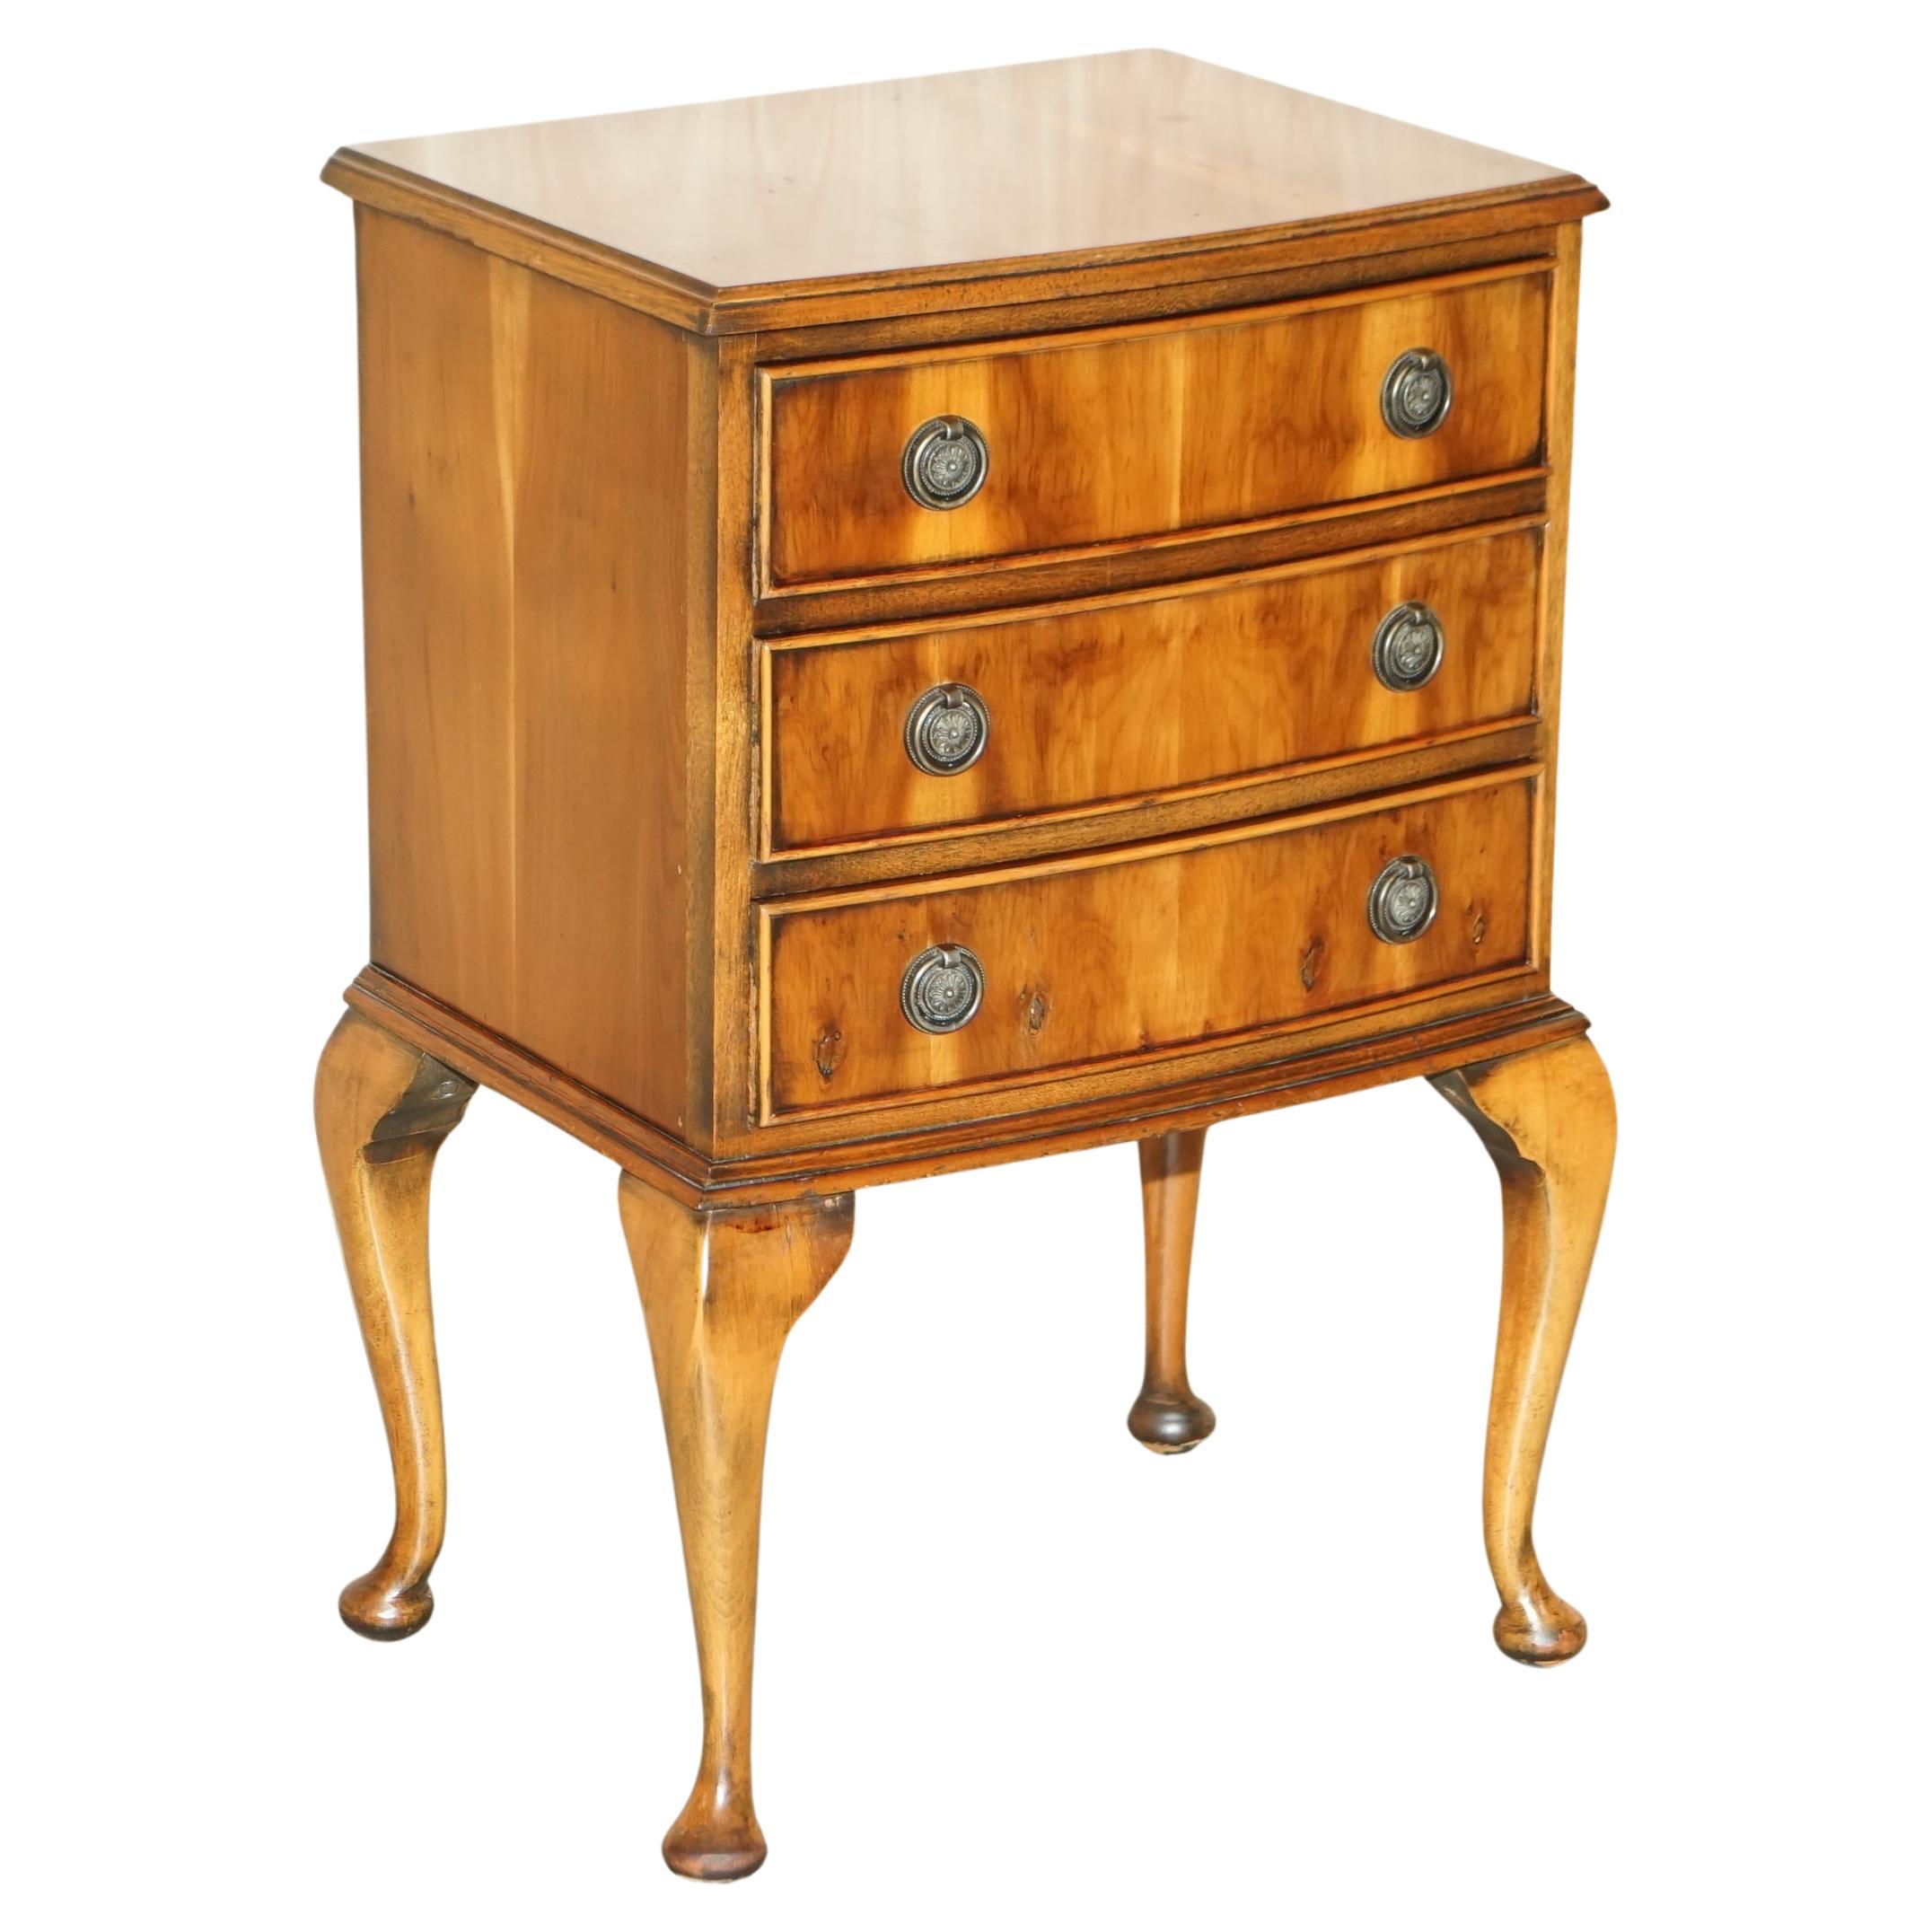 CIRCA 1940''s BURR YEW WOOD BOW FRONTED BEDSIDE SIDE TABLE CHEST OF DRAWERS im Angebot